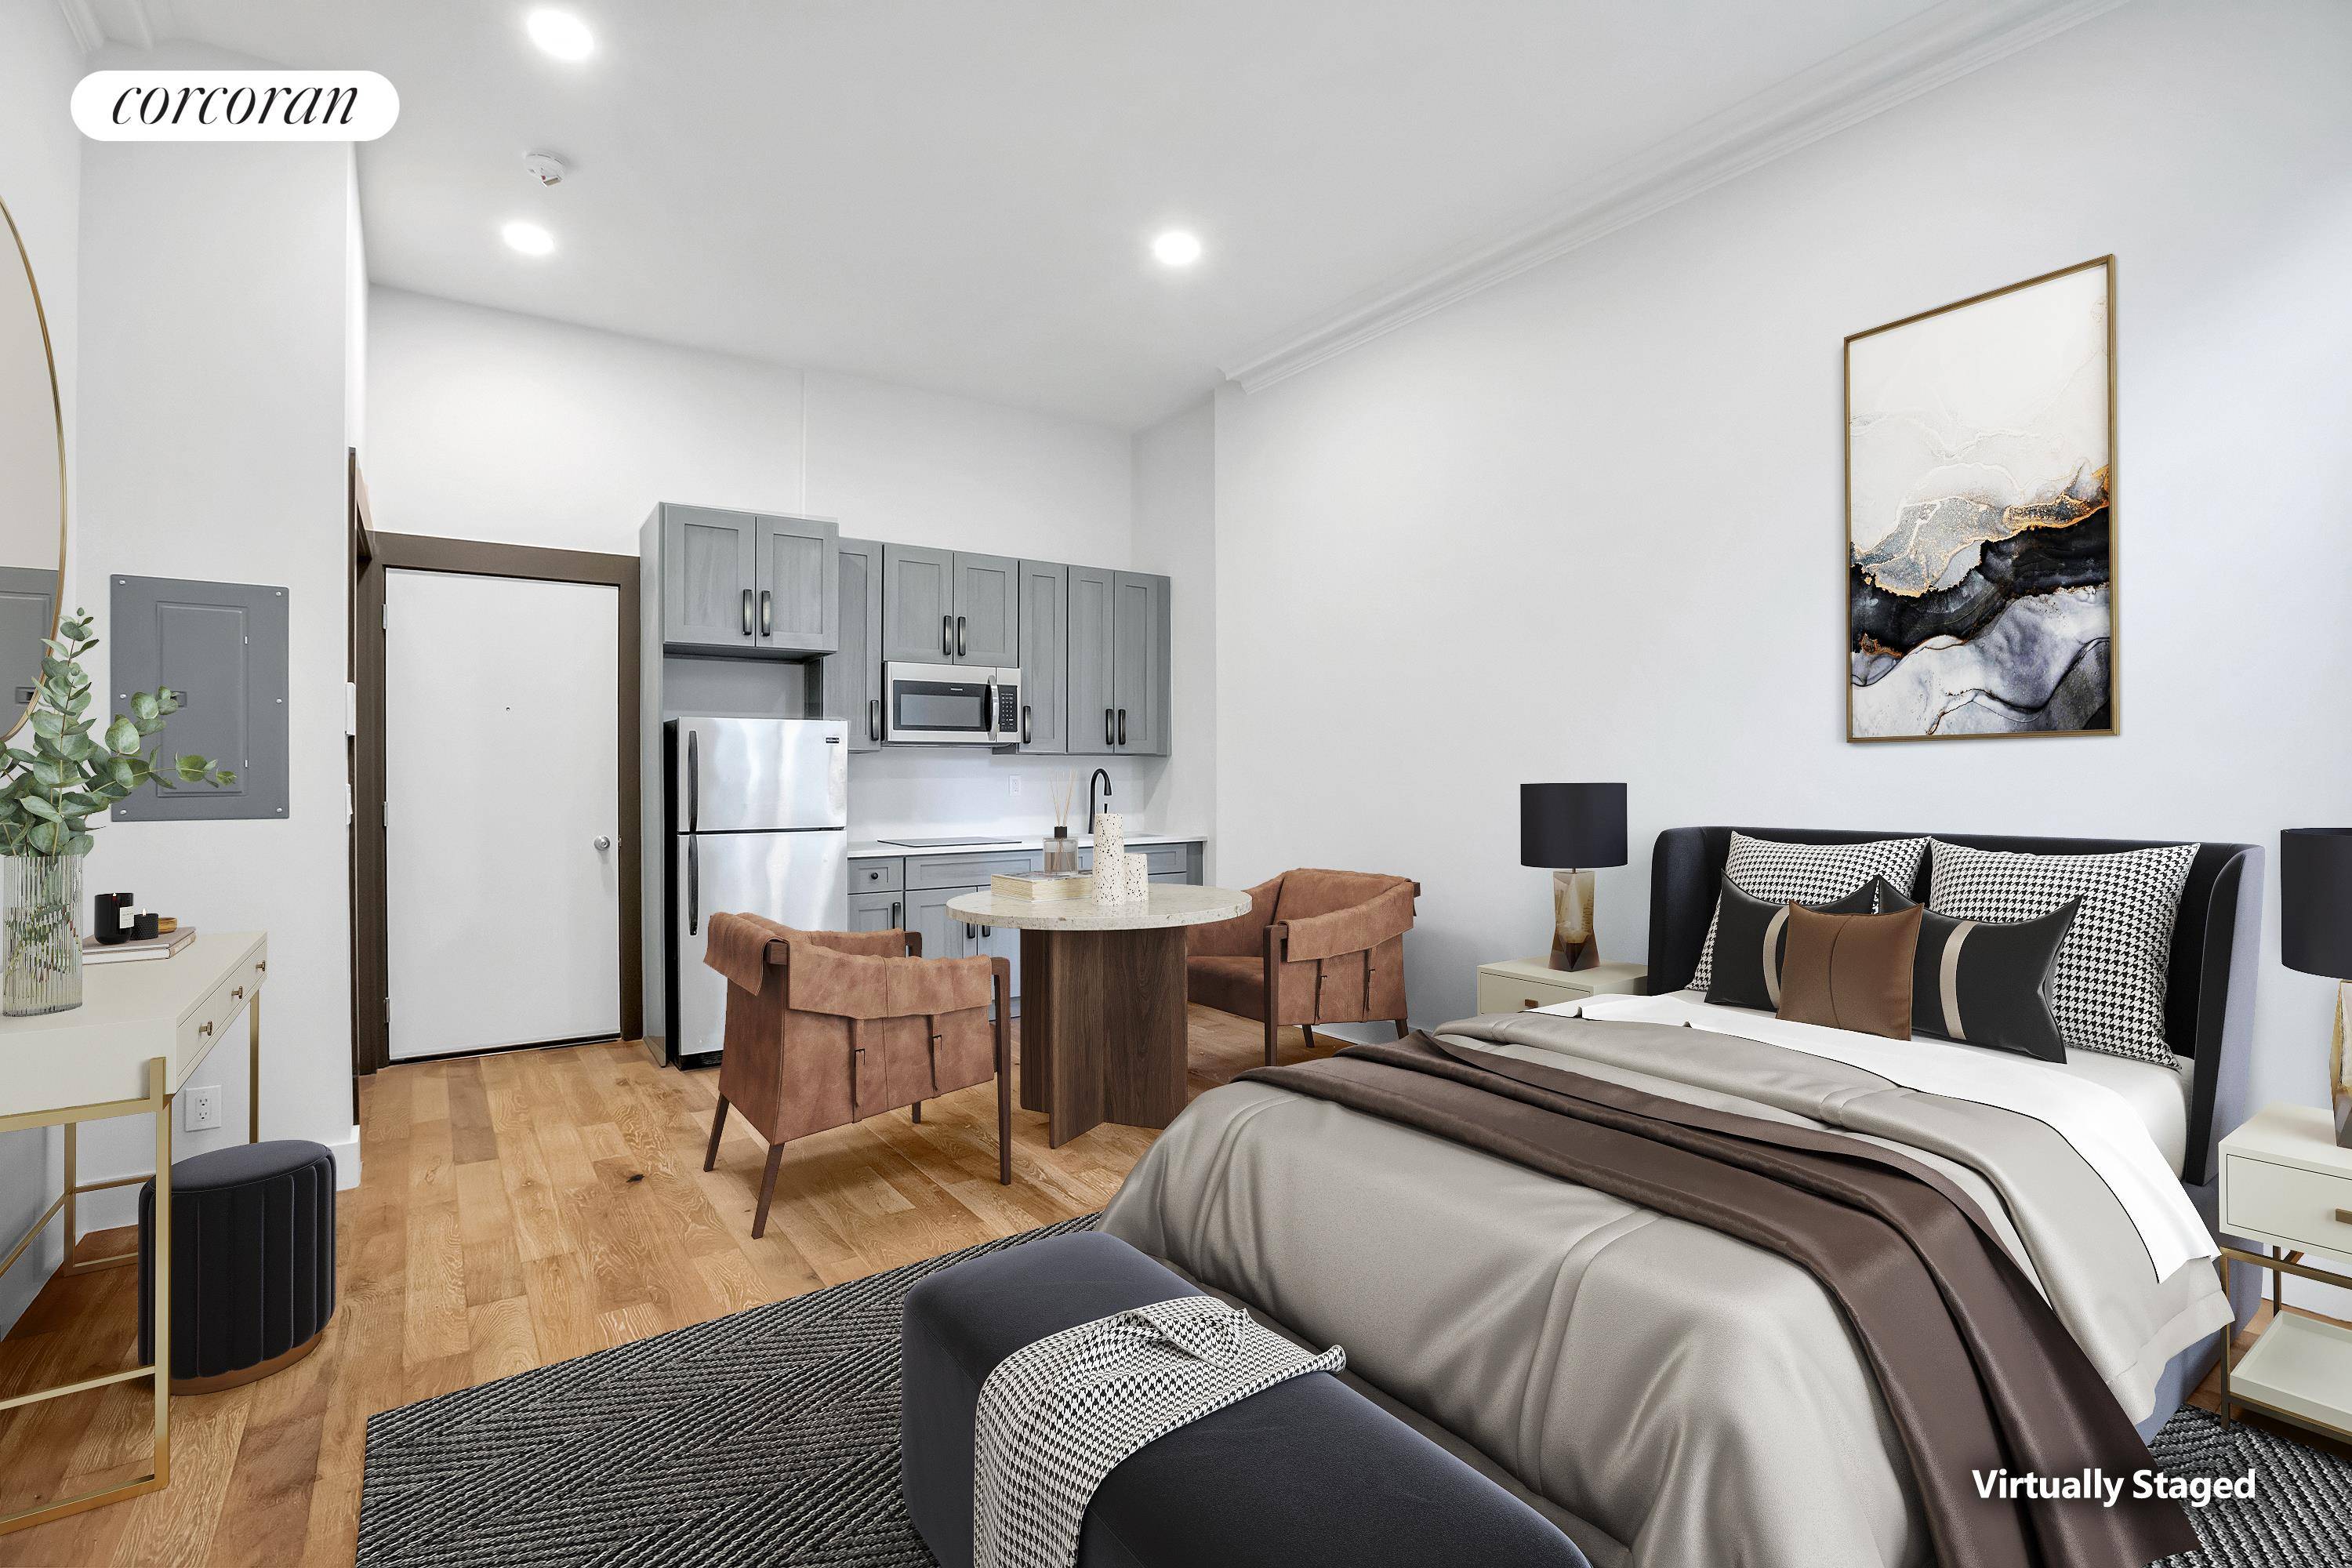 Welcome to 20 East 66th Street Unit 3BNestled between Madison Avenue and 5th Avenue, this stunning studio offers a prime Upper East Side location just moments from Central Park.